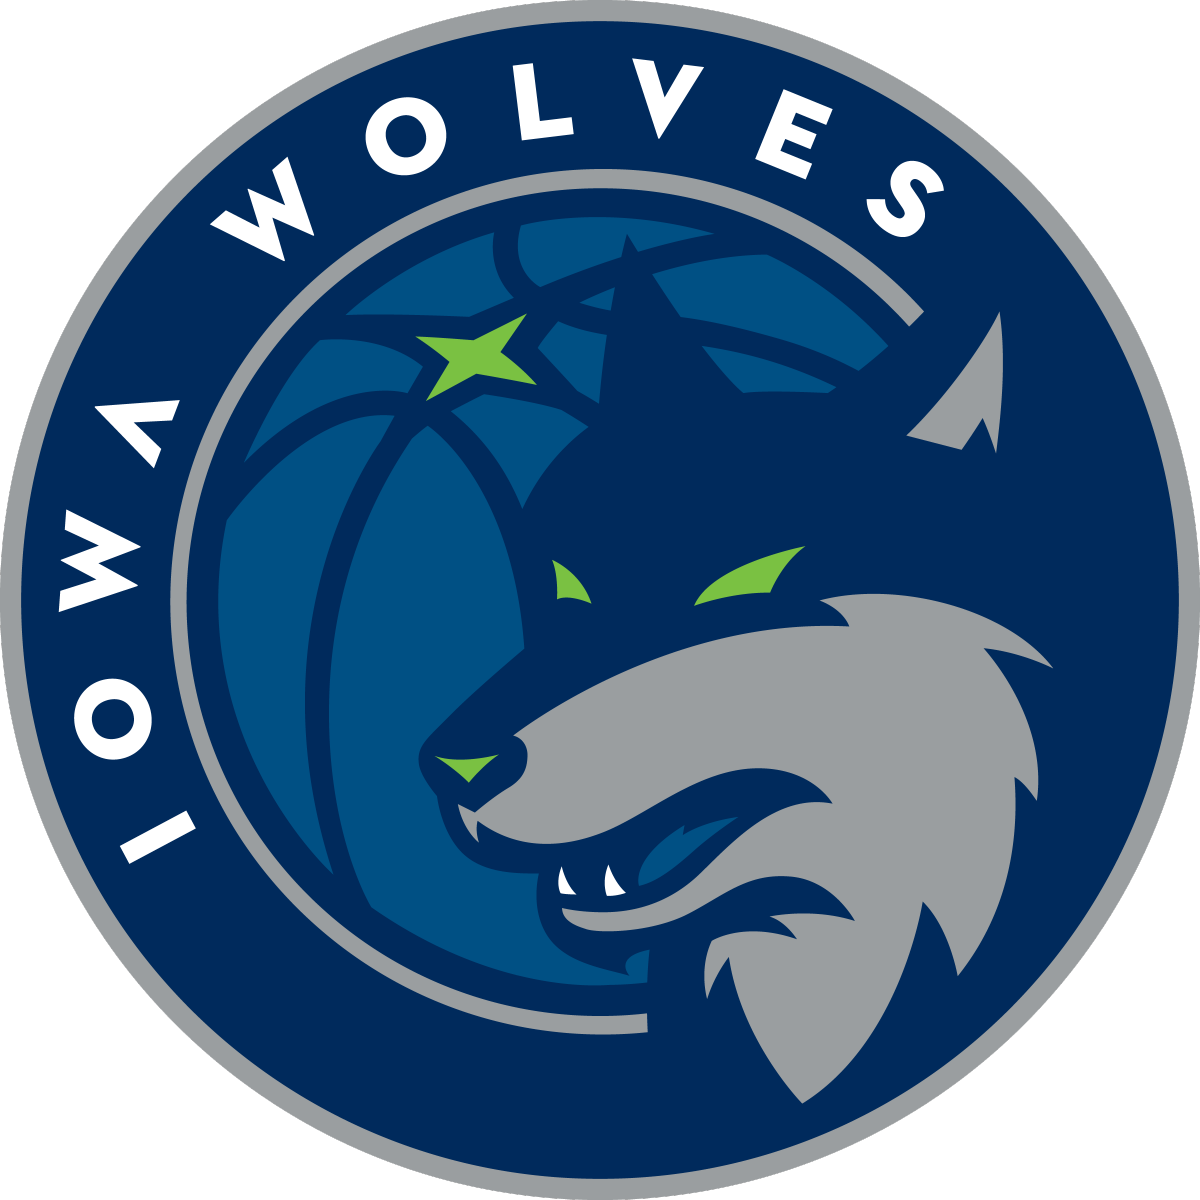 Iowa Wolves iron ons